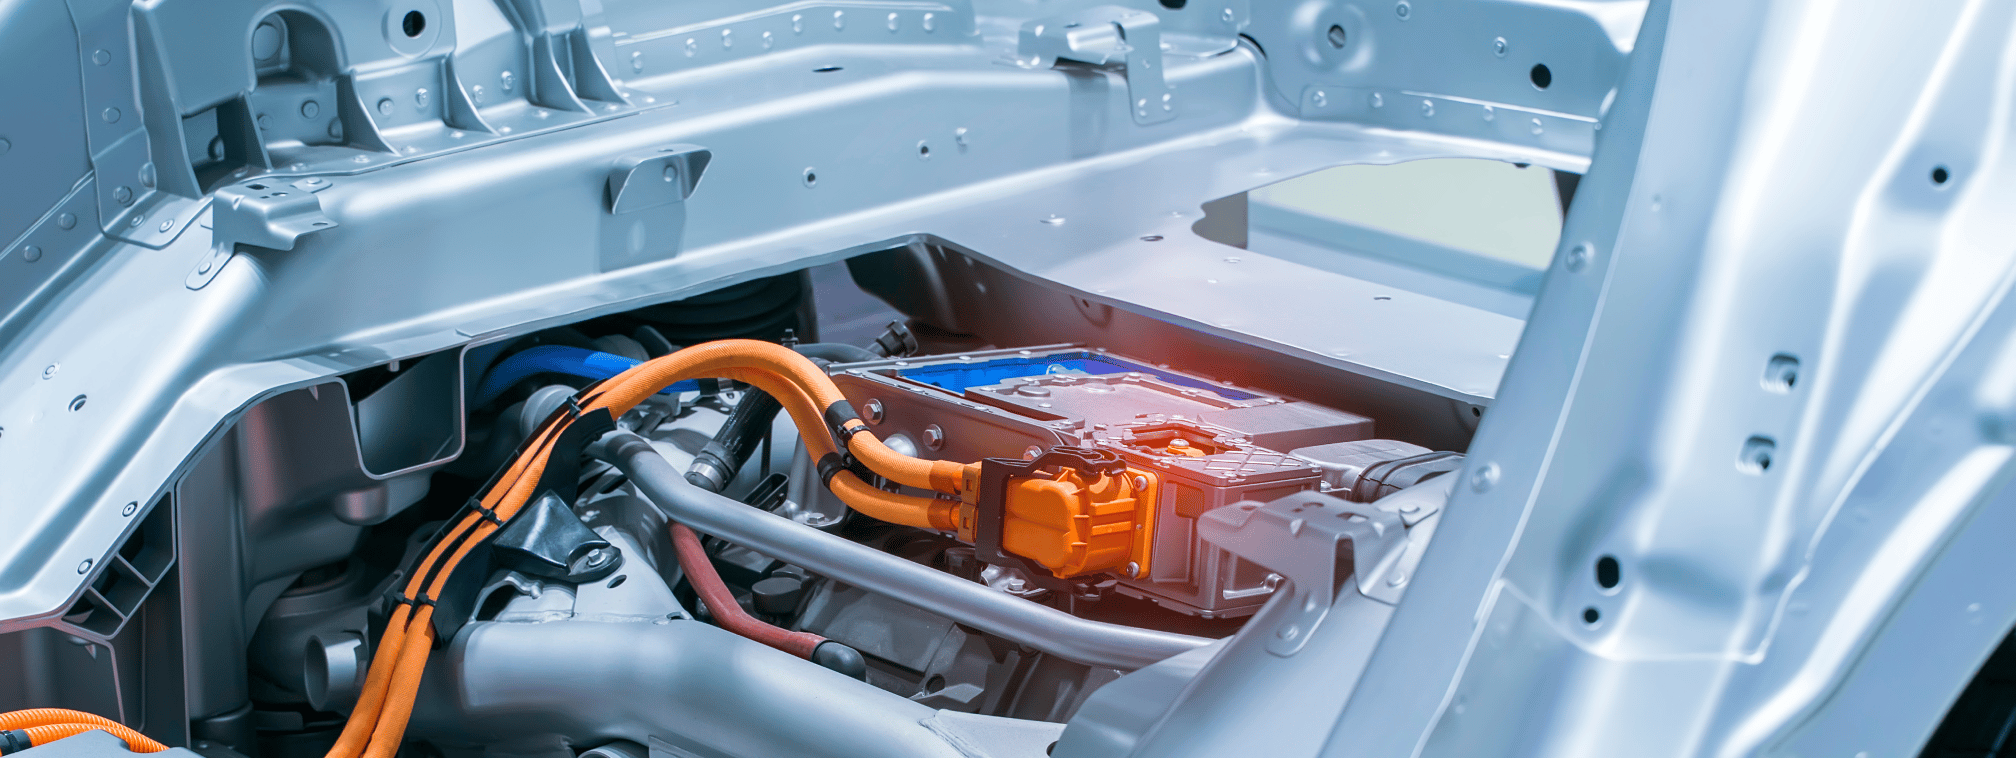 battery manufacturing header image